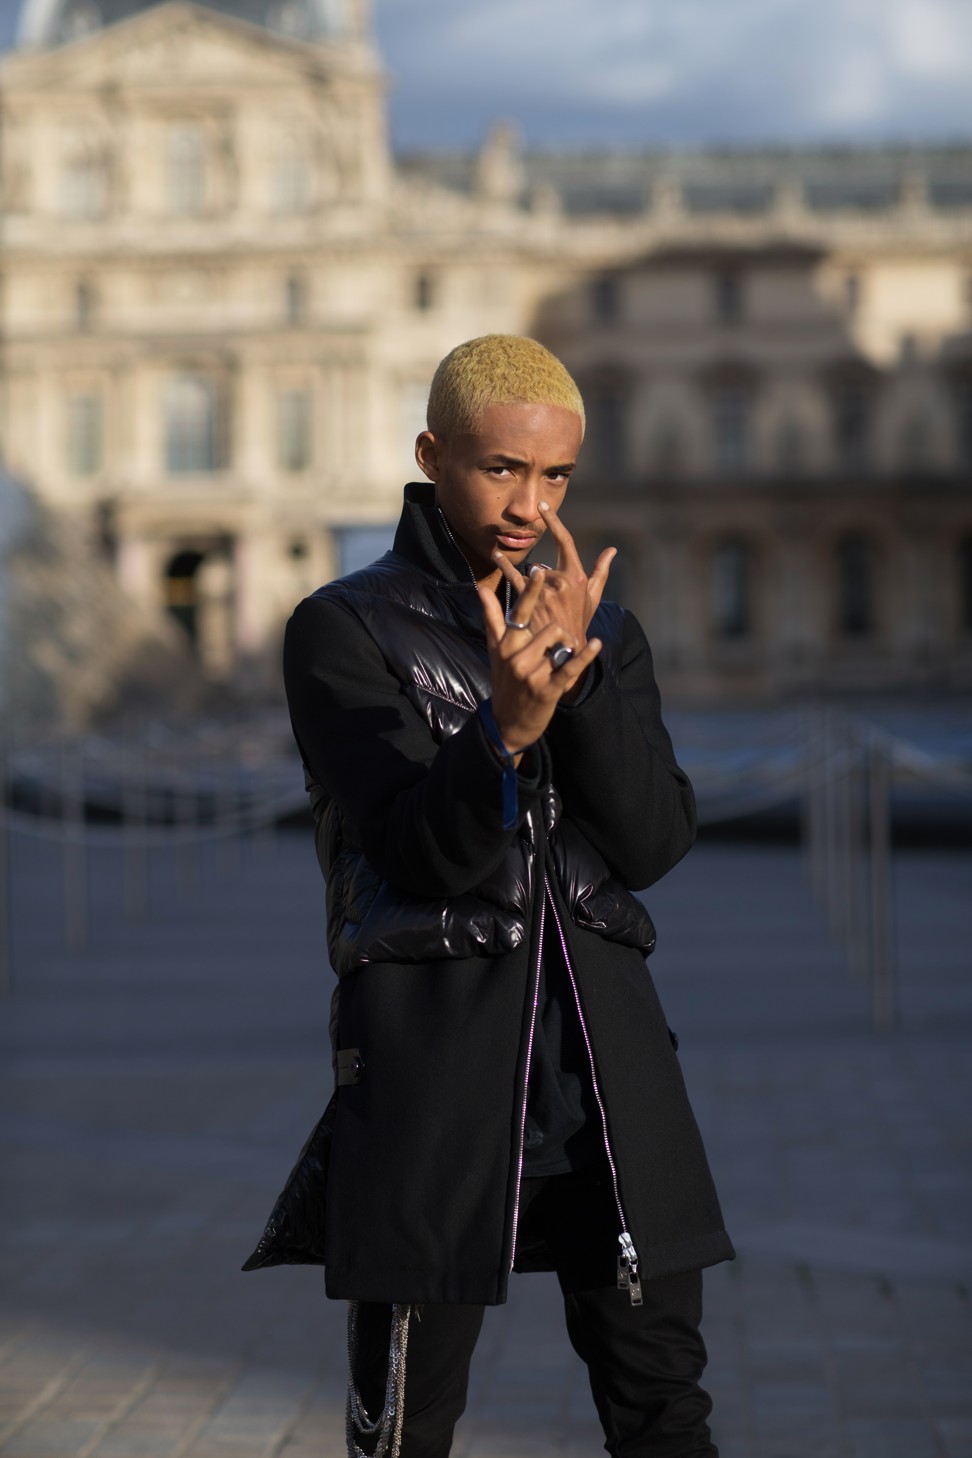 Millennial idol Jaden Smith attends the Louis Vuitton show. Young celebrities play a big role in streetwear x high fashion collaborations.